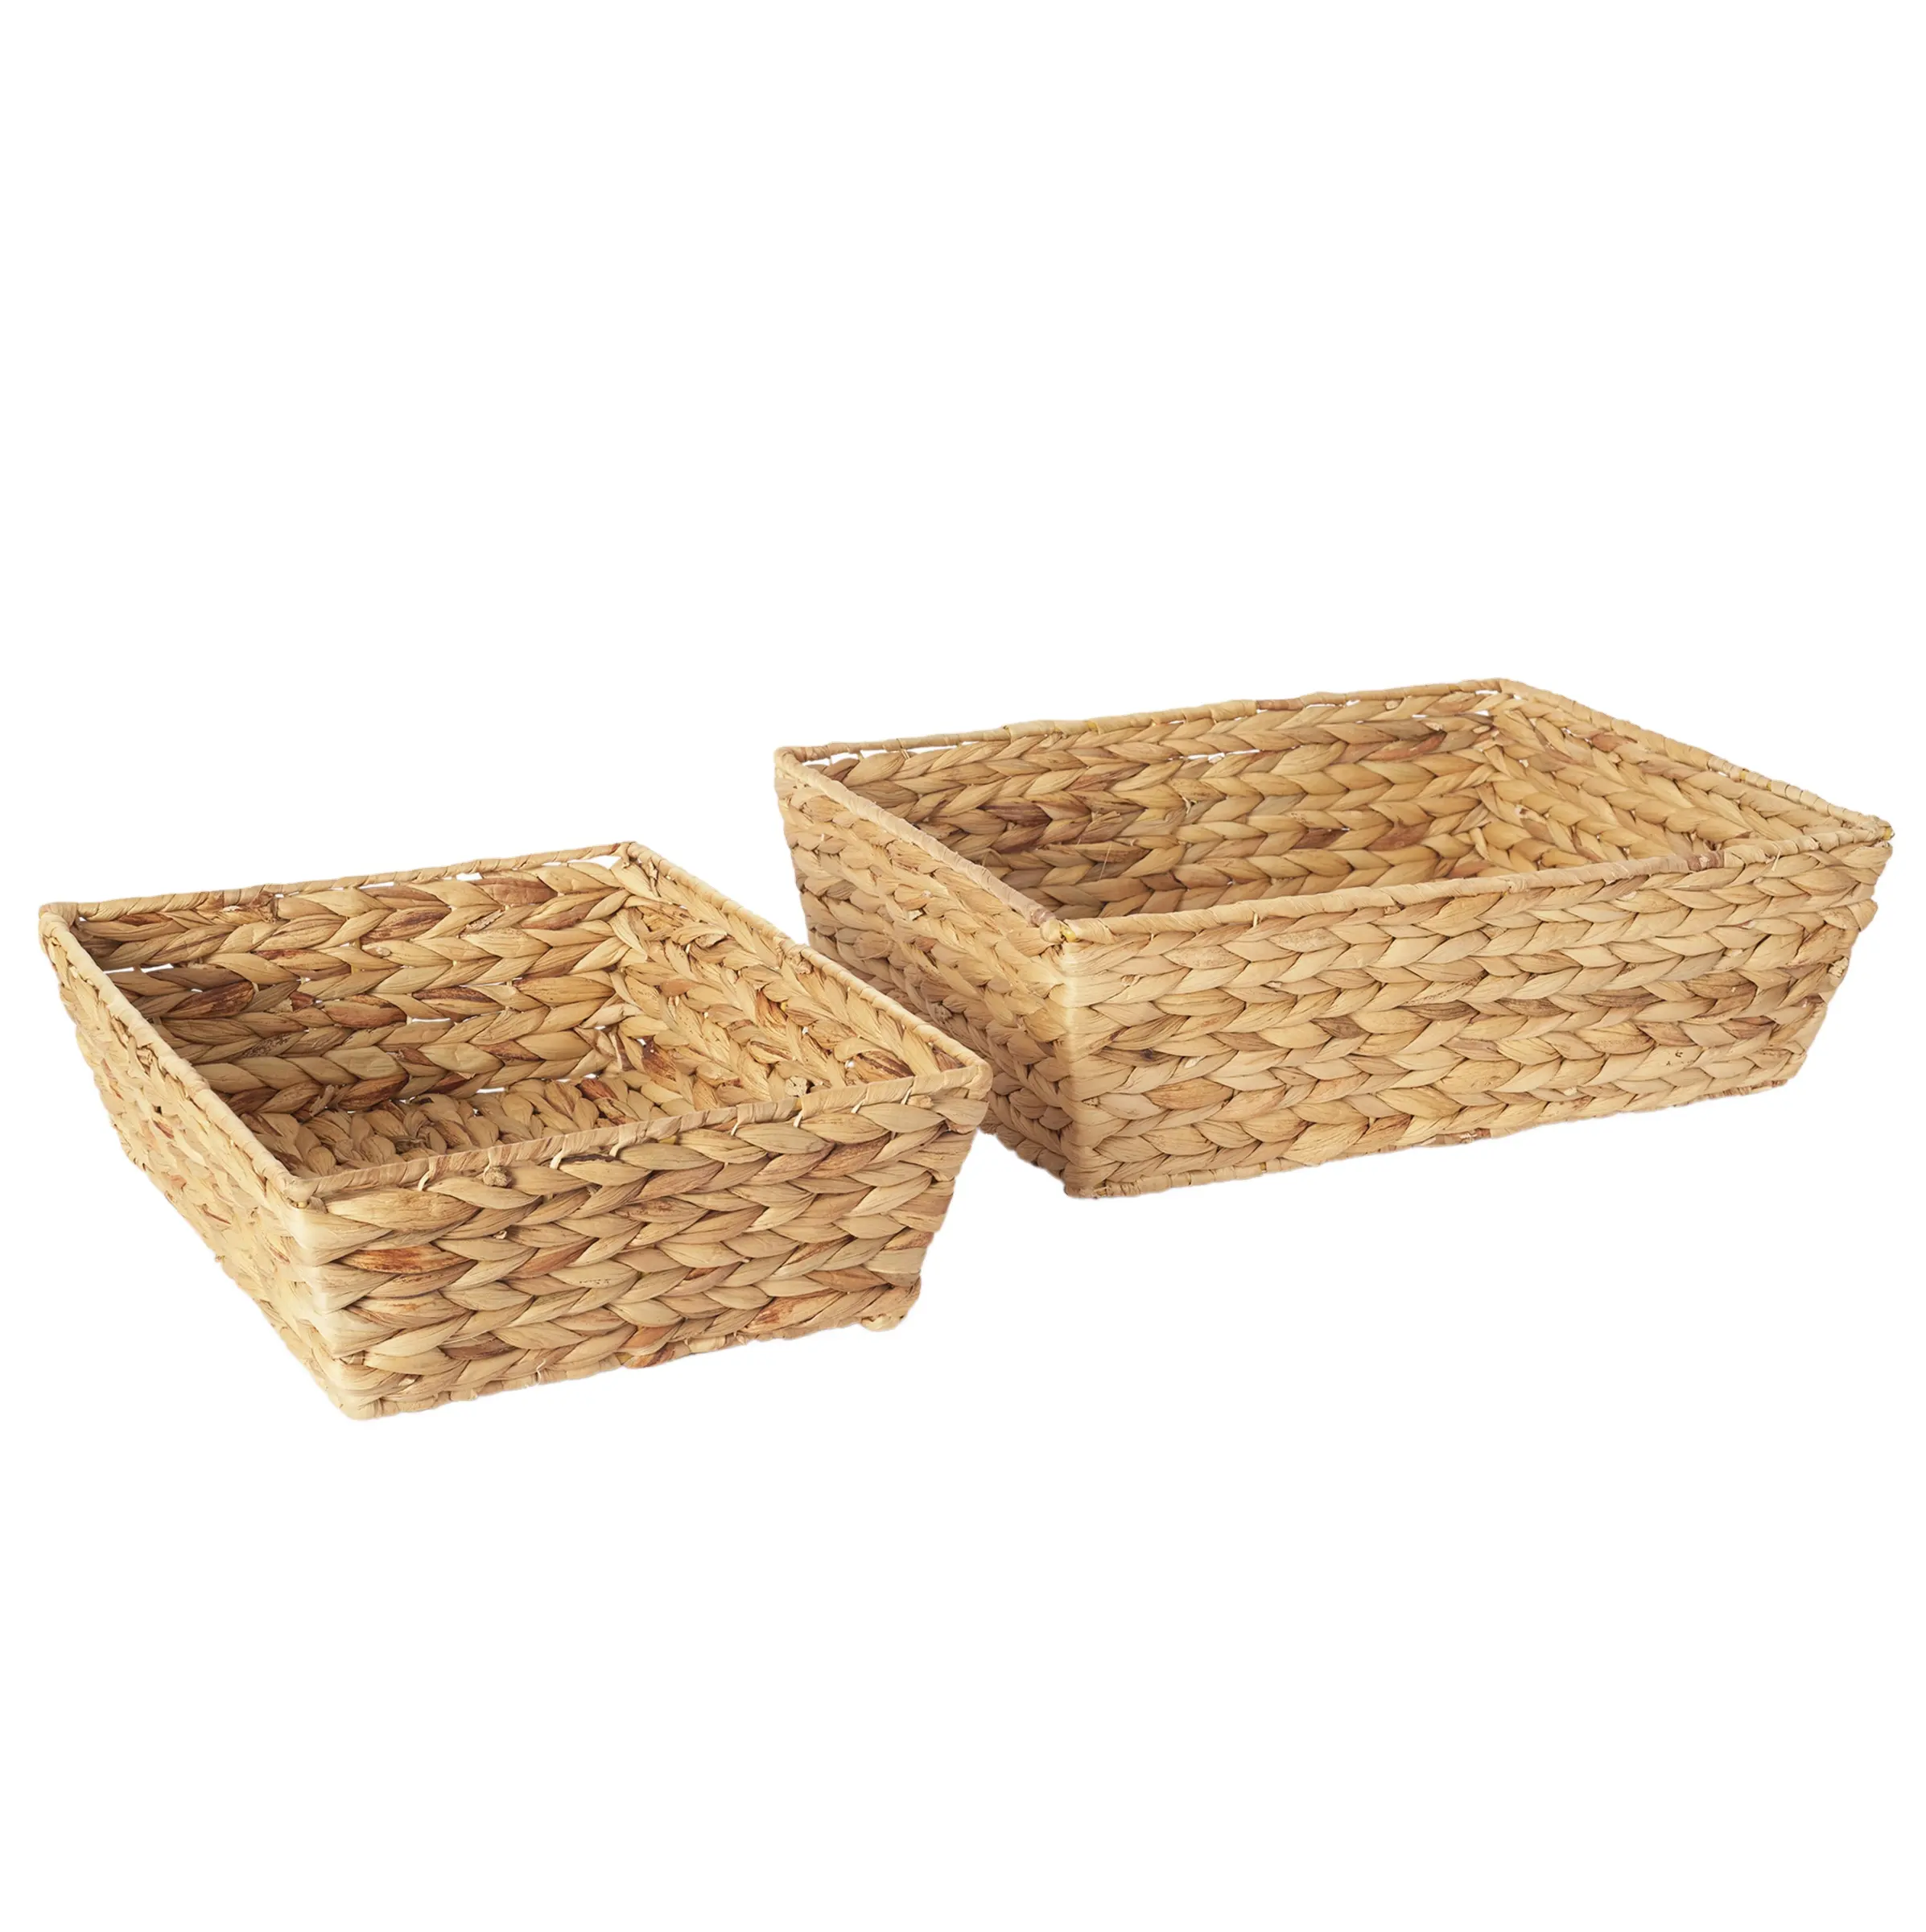 Set of 4 Woven Water Hyacinth Baskets with Handle Handmade Woven Water Hyacinth Basket Storage Baskets Storage Potential